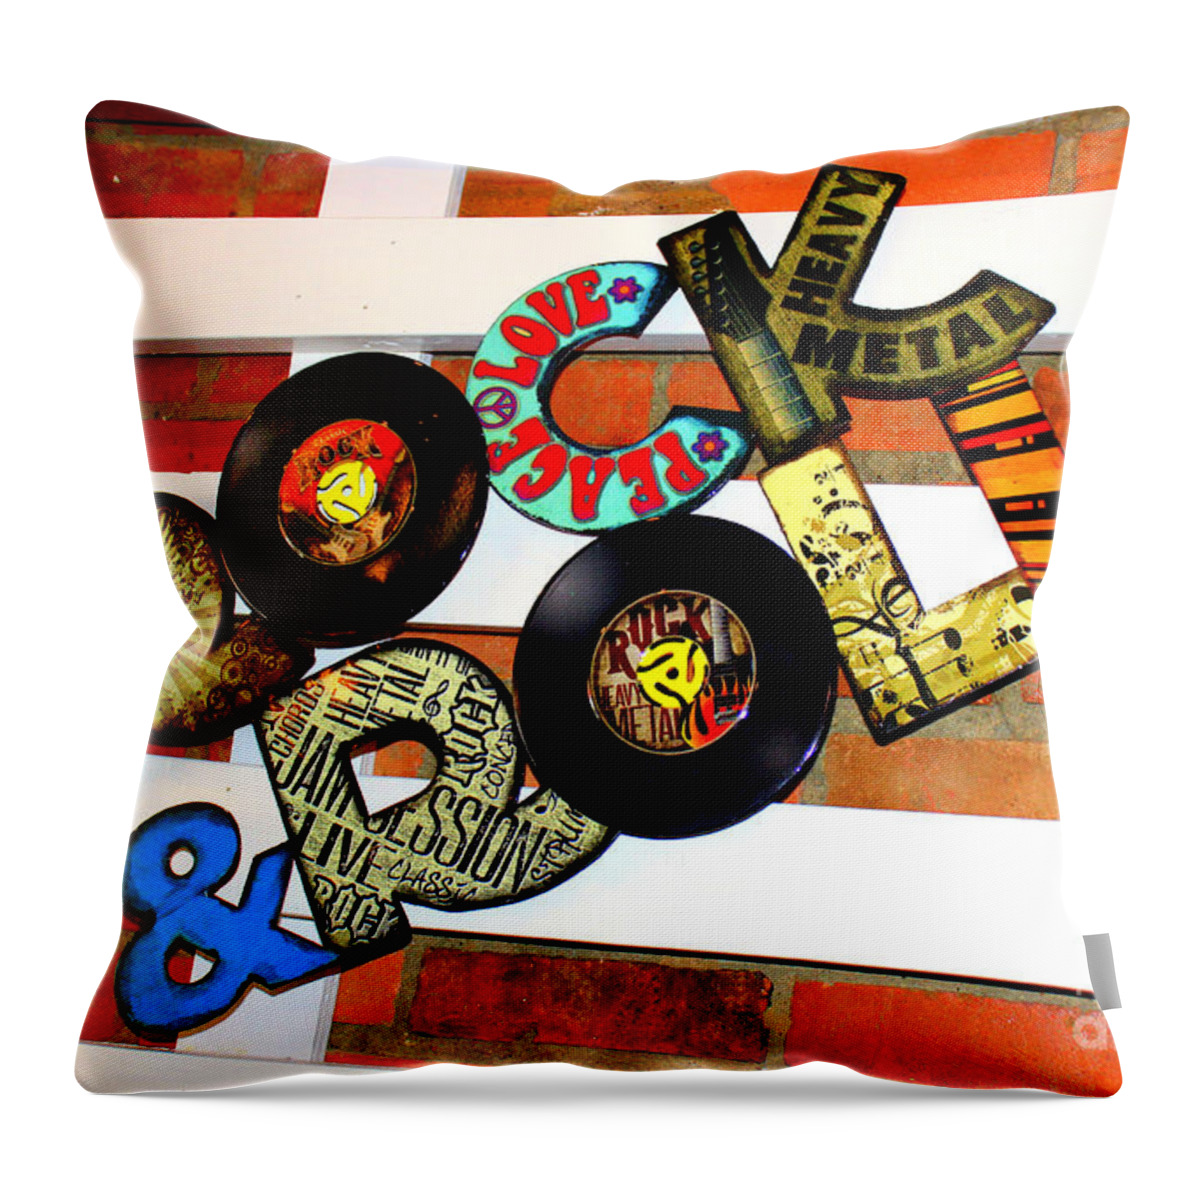 I Love Rock N Roll Song Throw Pillow featuring the photograph I Love Rock N Roll  by Kathy White